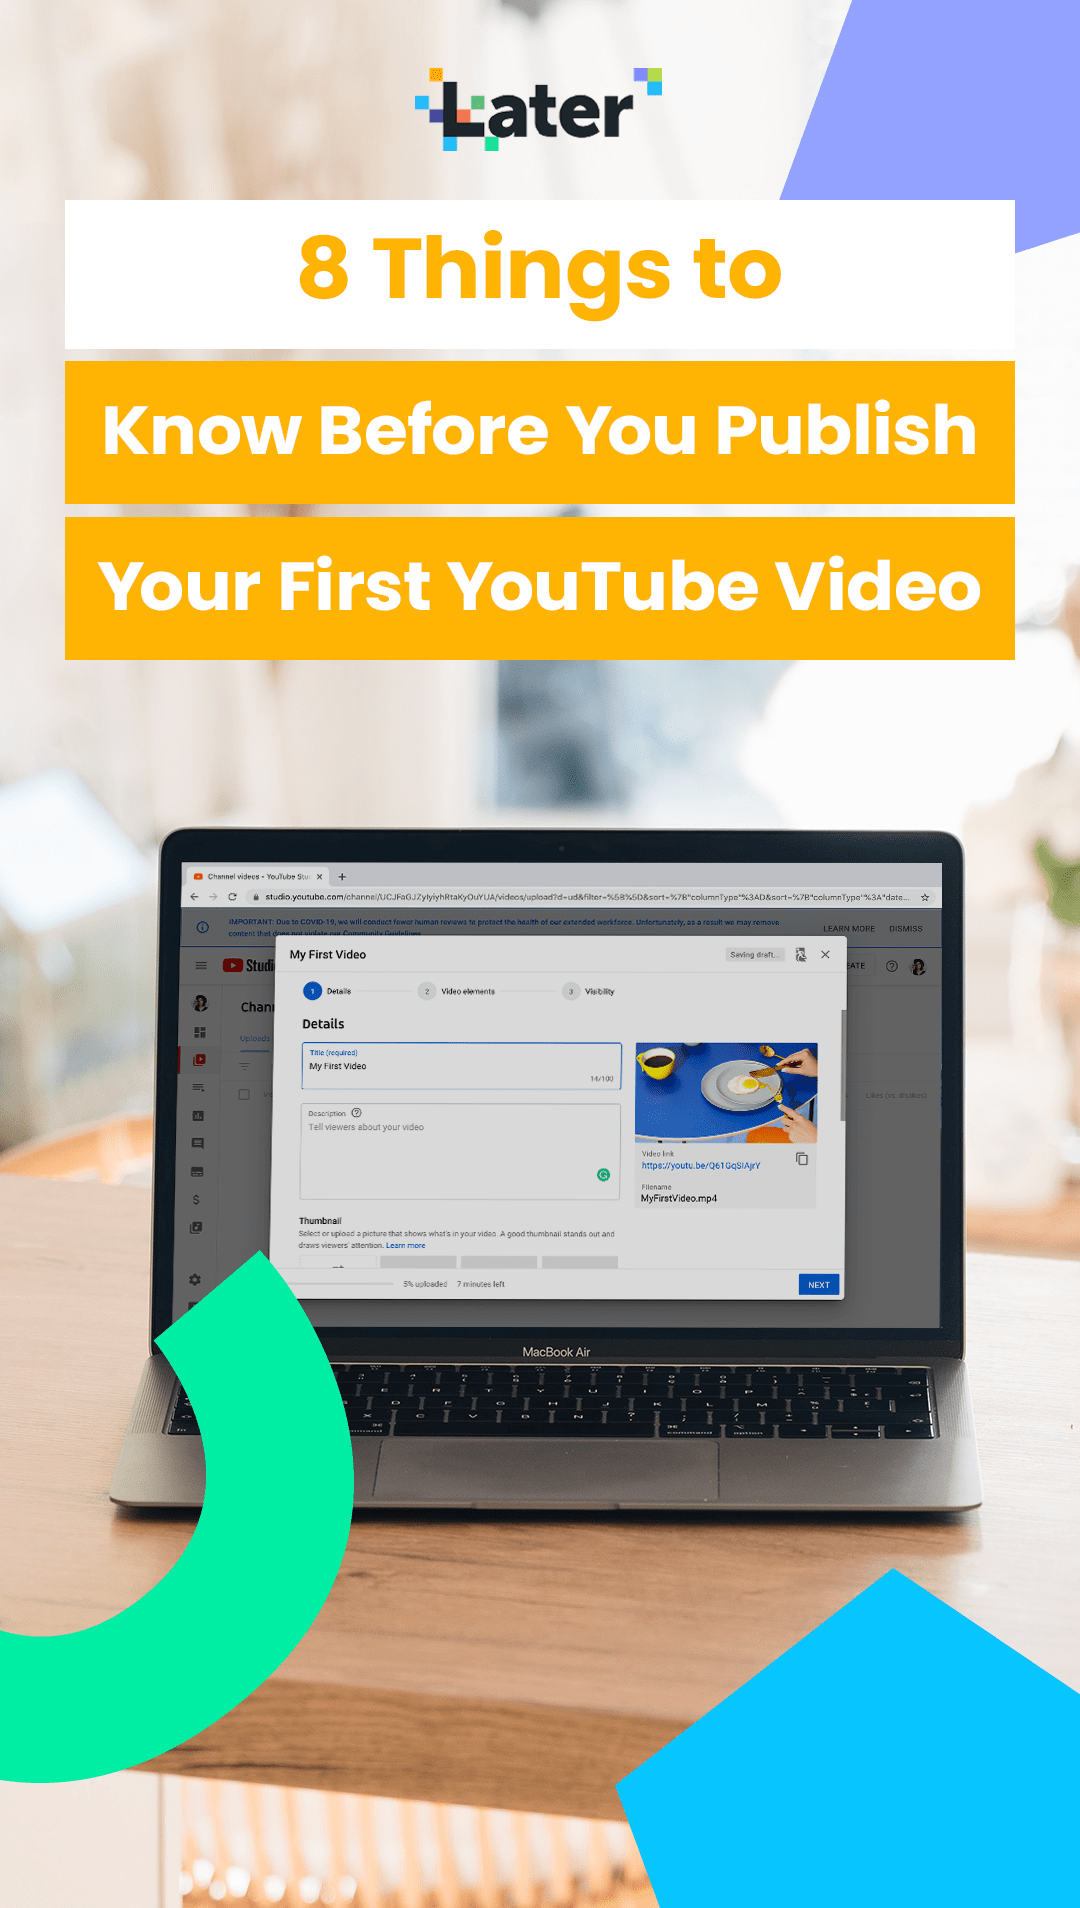 8 Things to know before you publish your first YouTube video